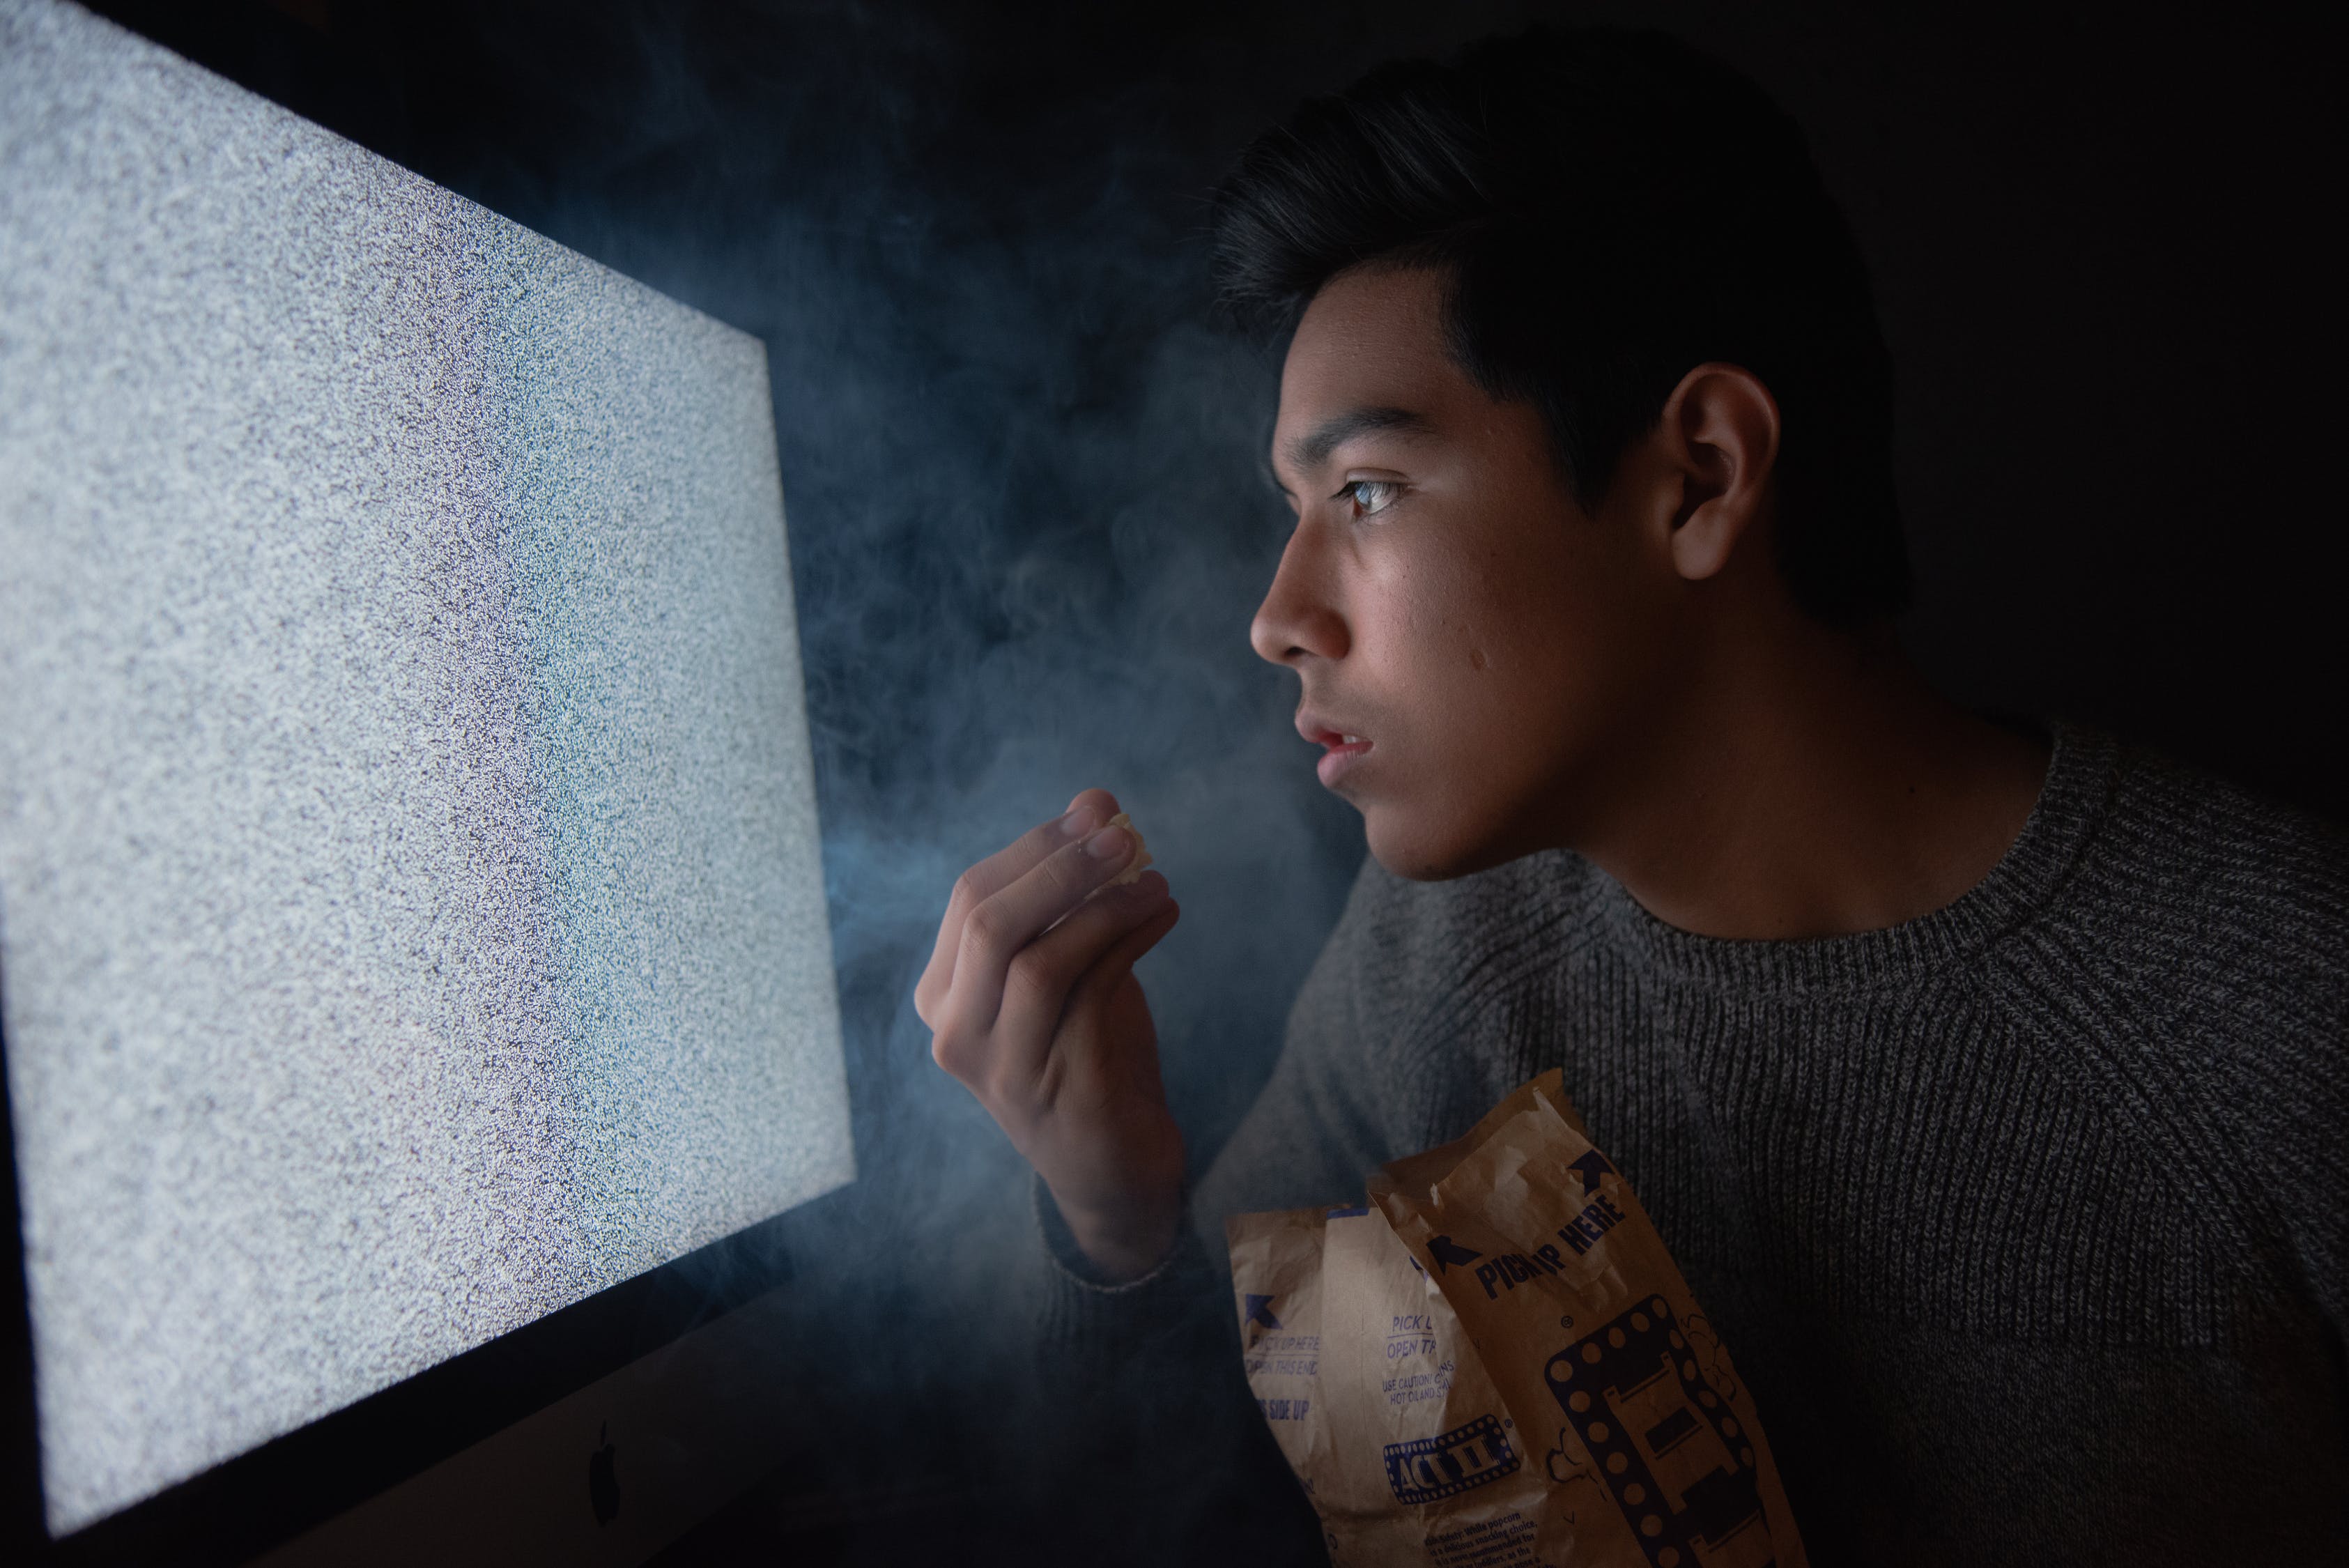 A man watching so close to the TV while eating a popcorn